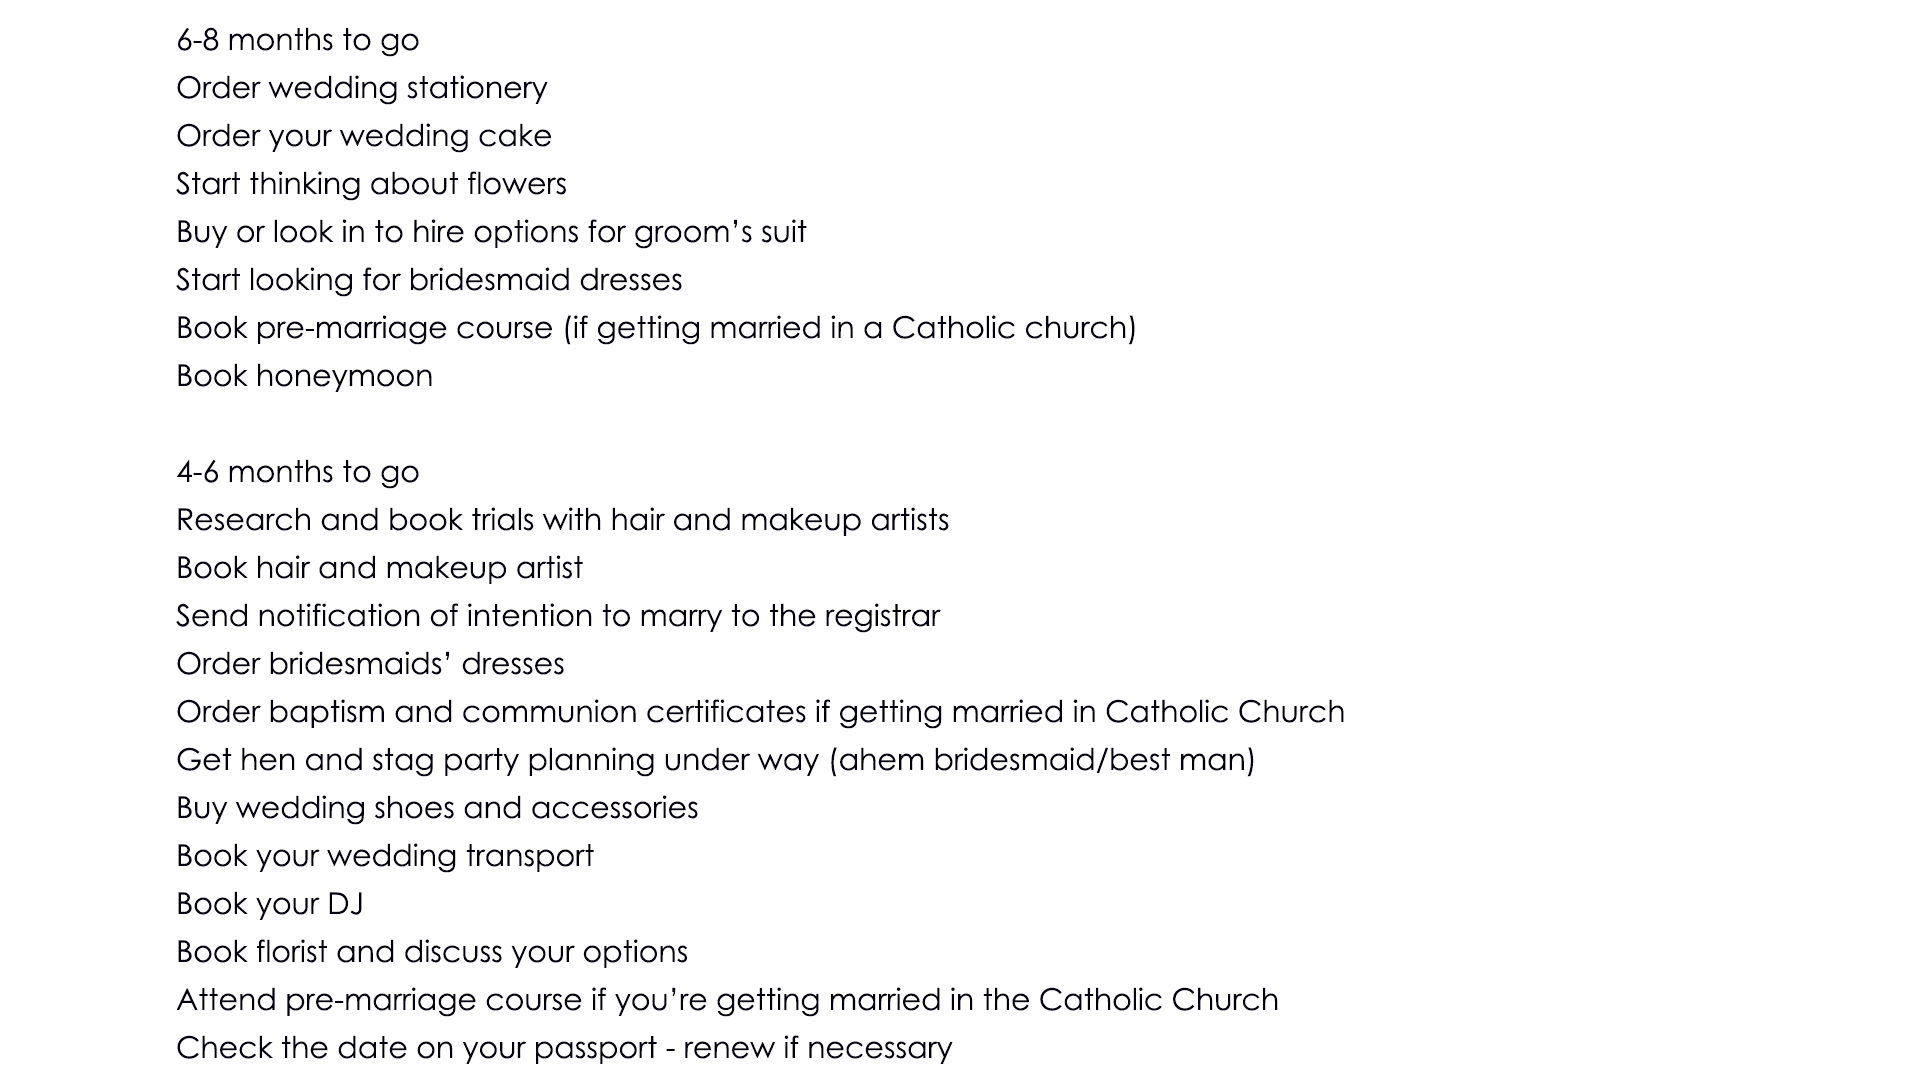 Printable wedding checklist for planning all functions